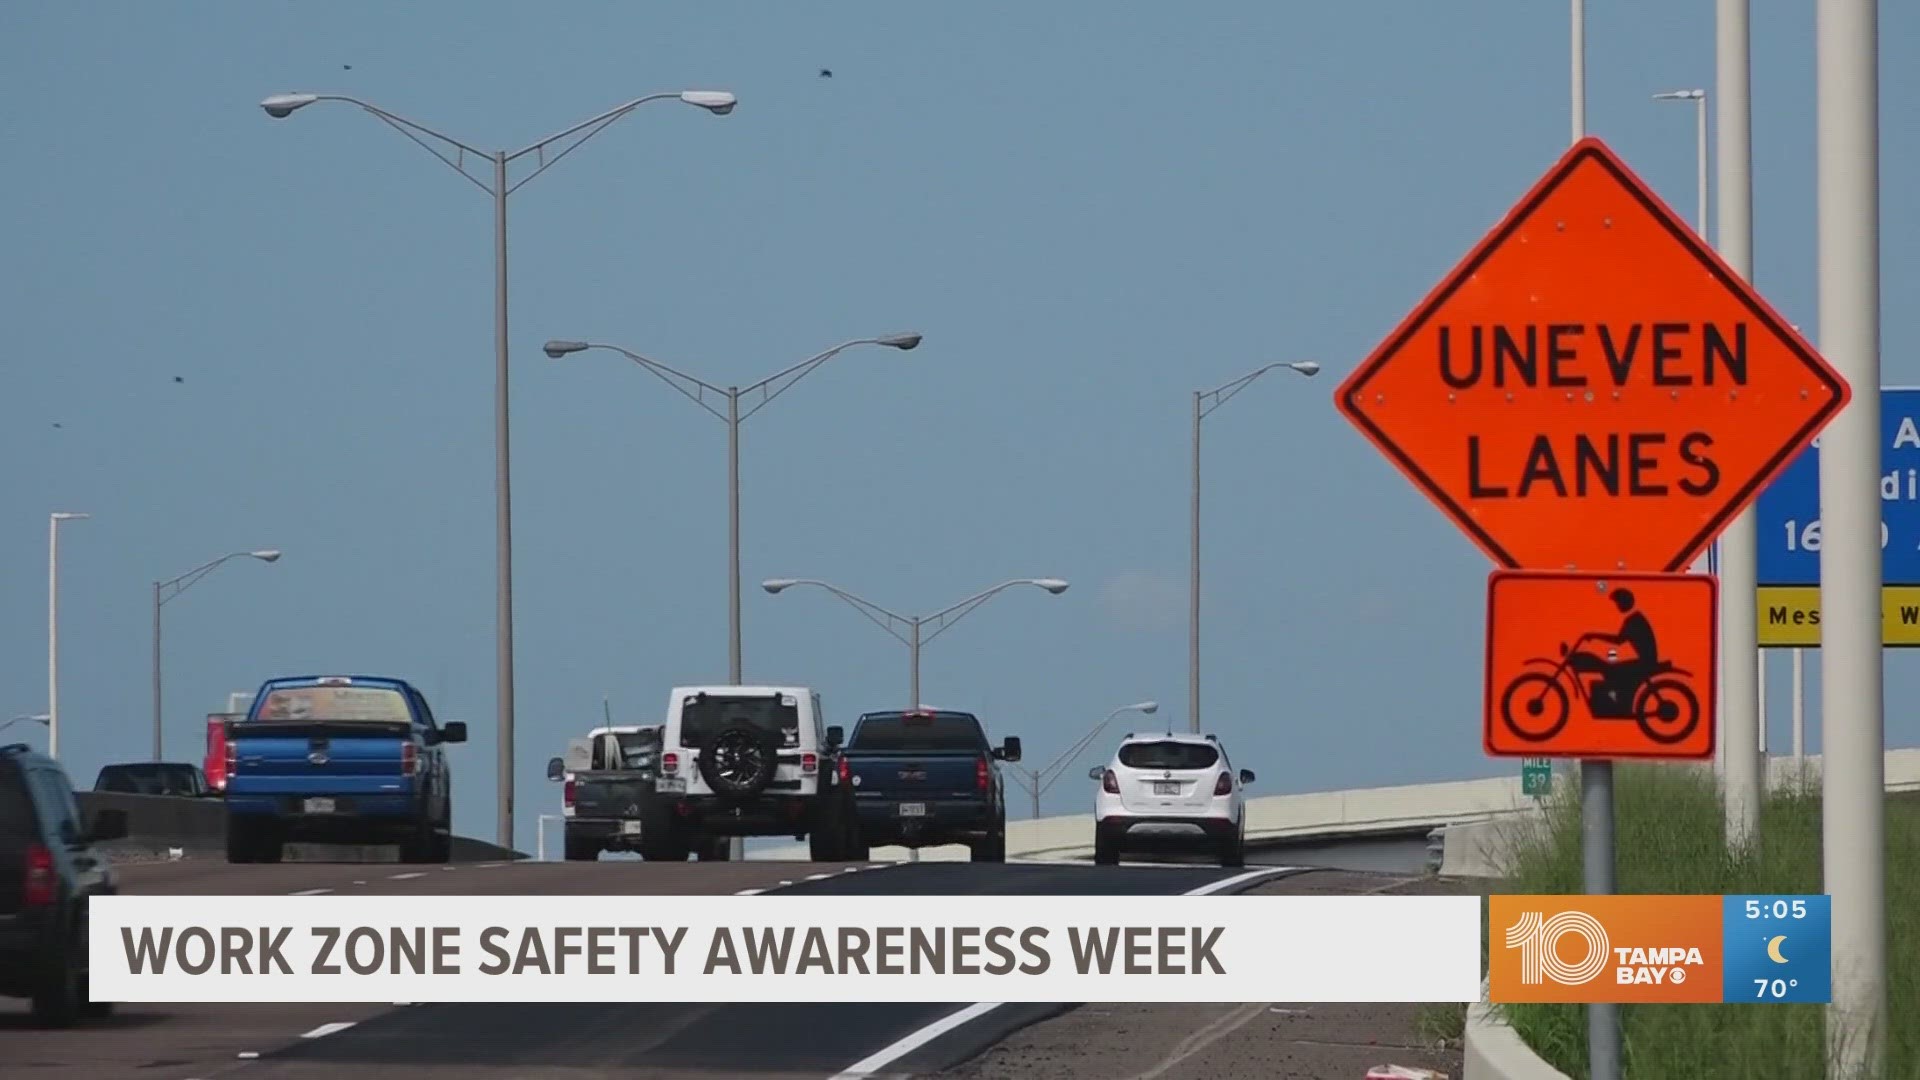 Data shows there were 293 deaths and 277 serious injuries in work zones across the state. Officials are encouraging drivers to be careful and pay attention.